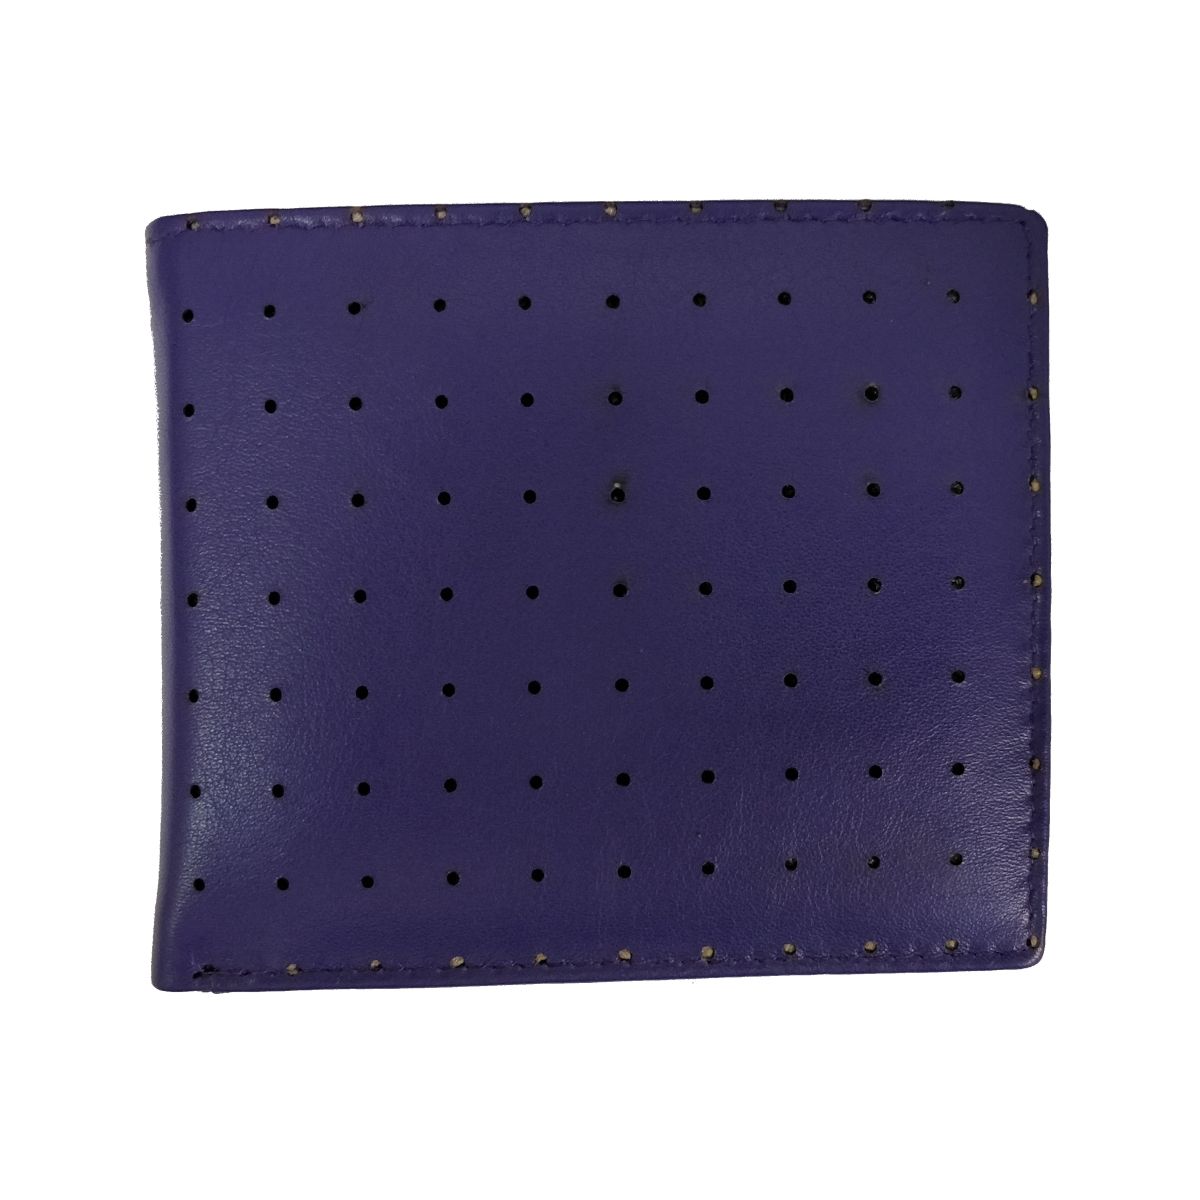 Blue Wallets , Wallets Prices , Best Price Wallets - Wallets Brands